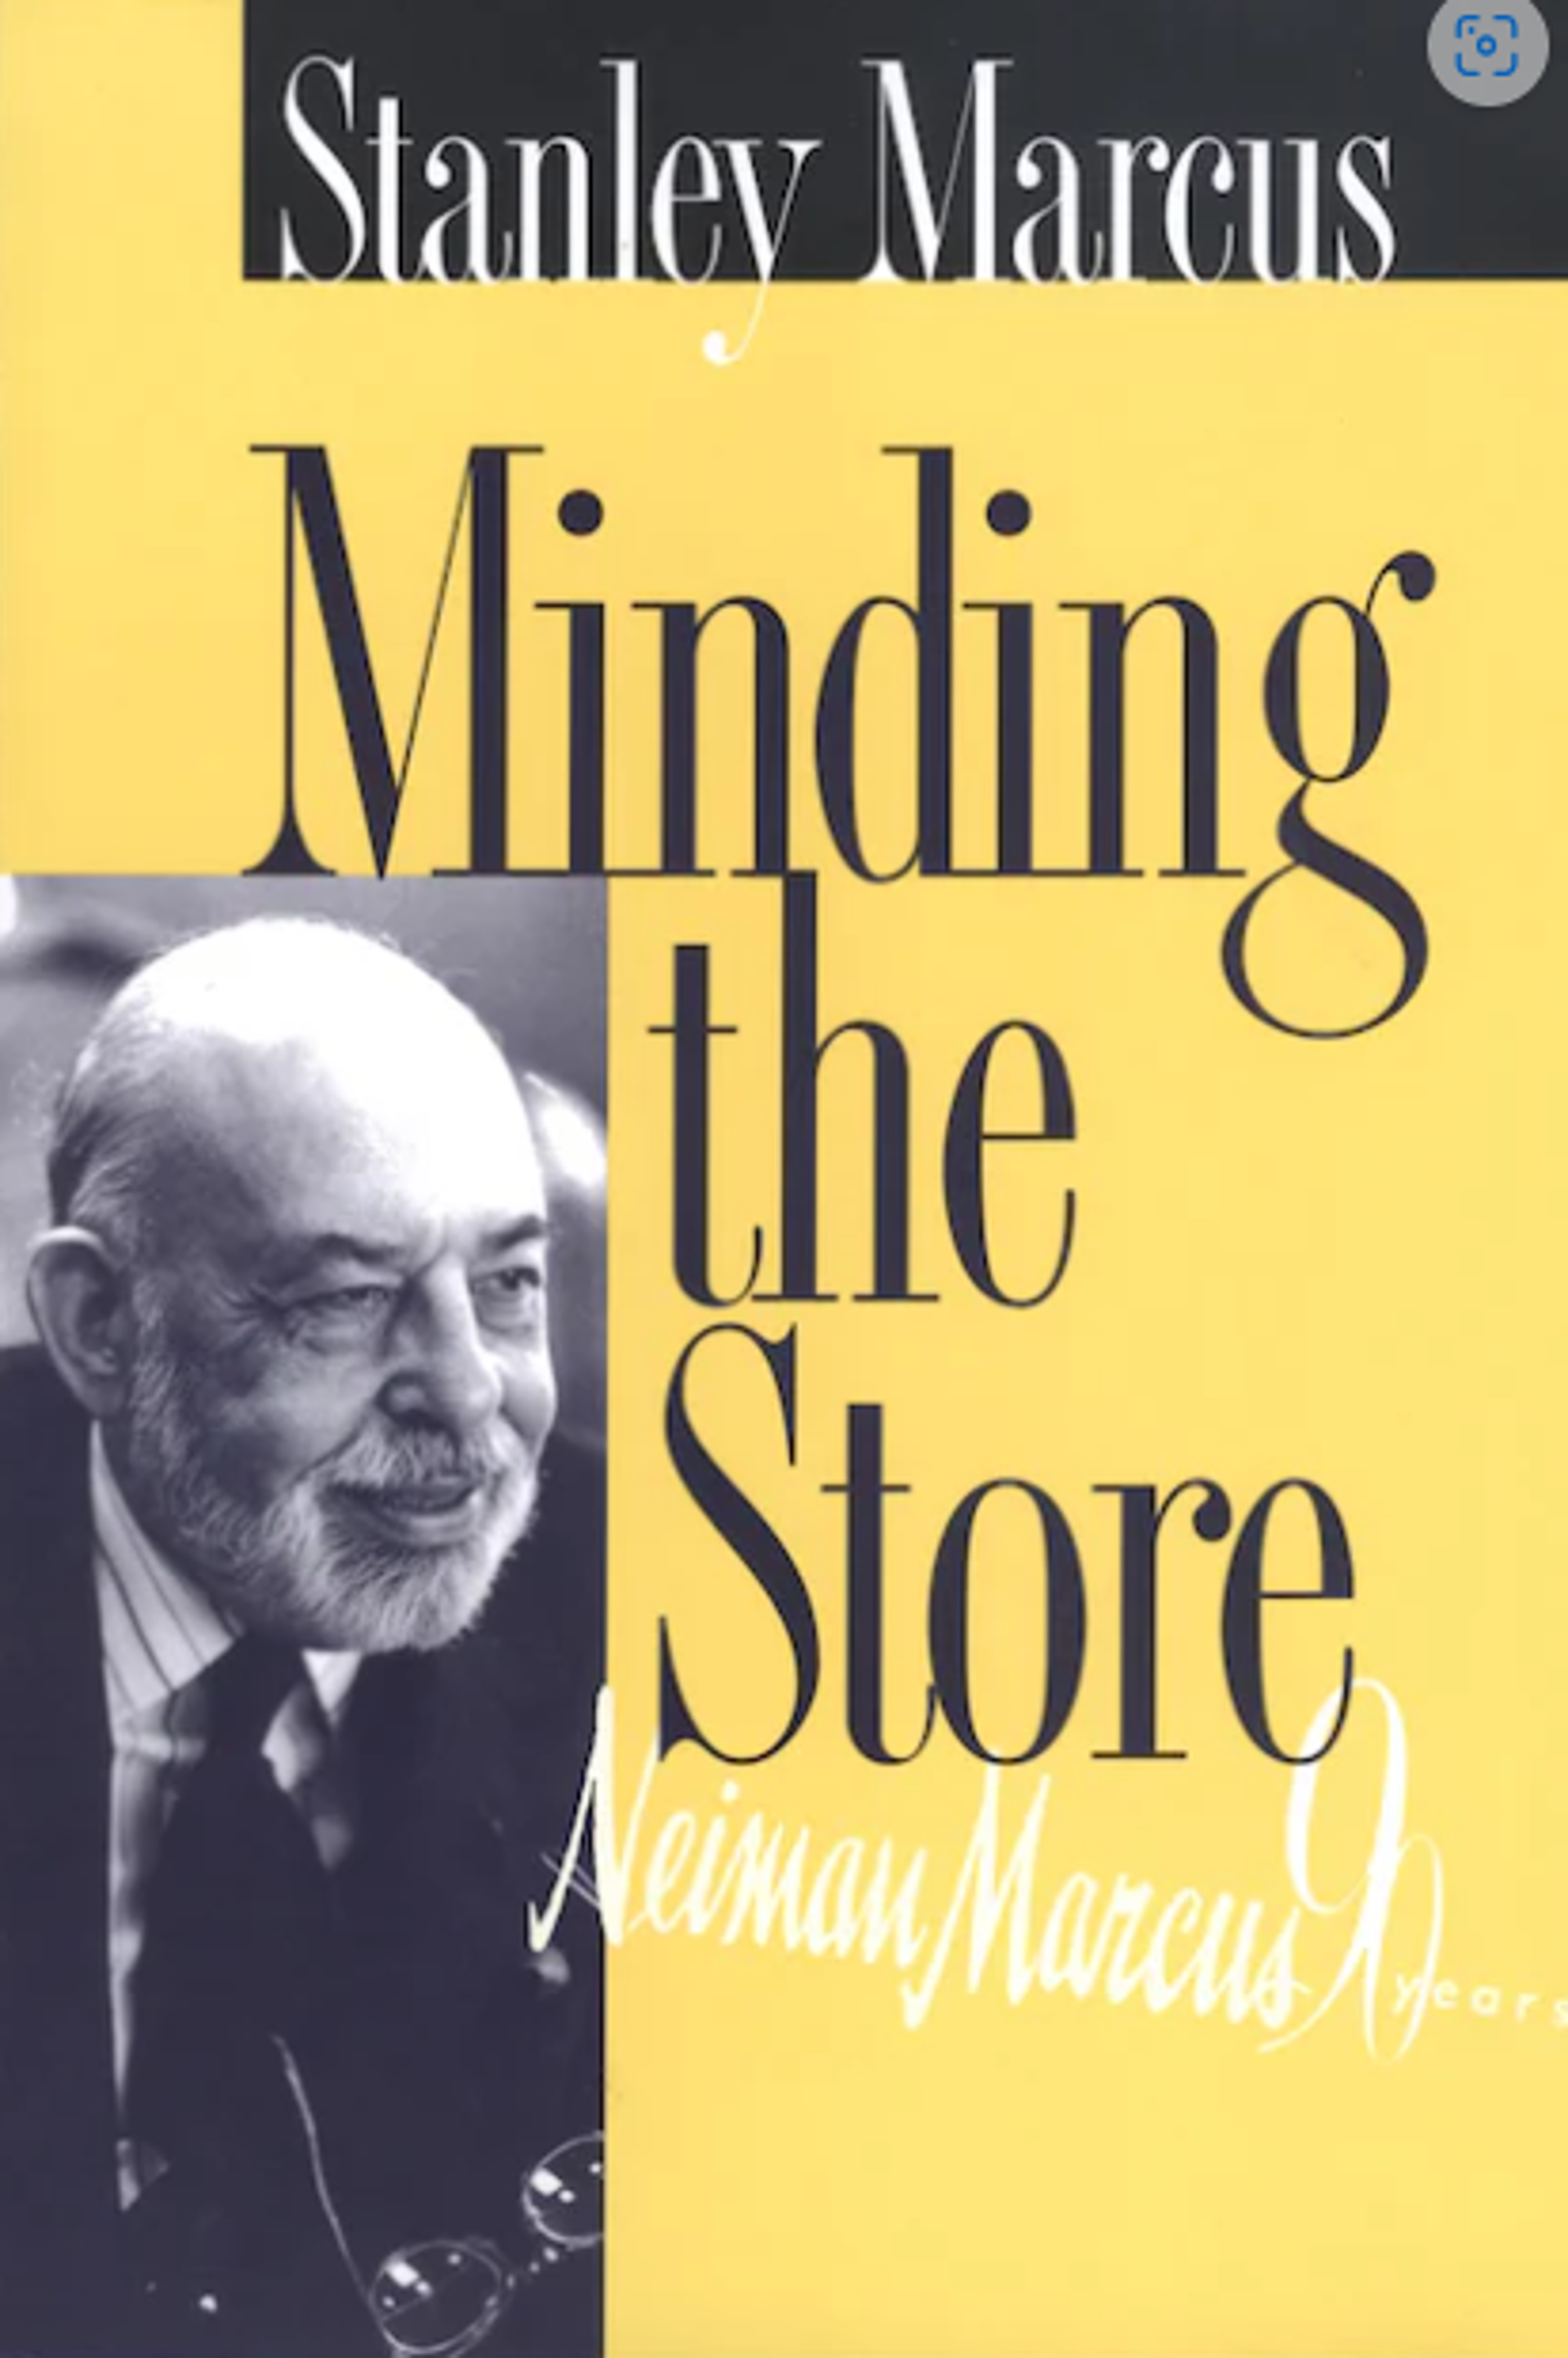 Minding the Store by Stanley Marcus by Publications